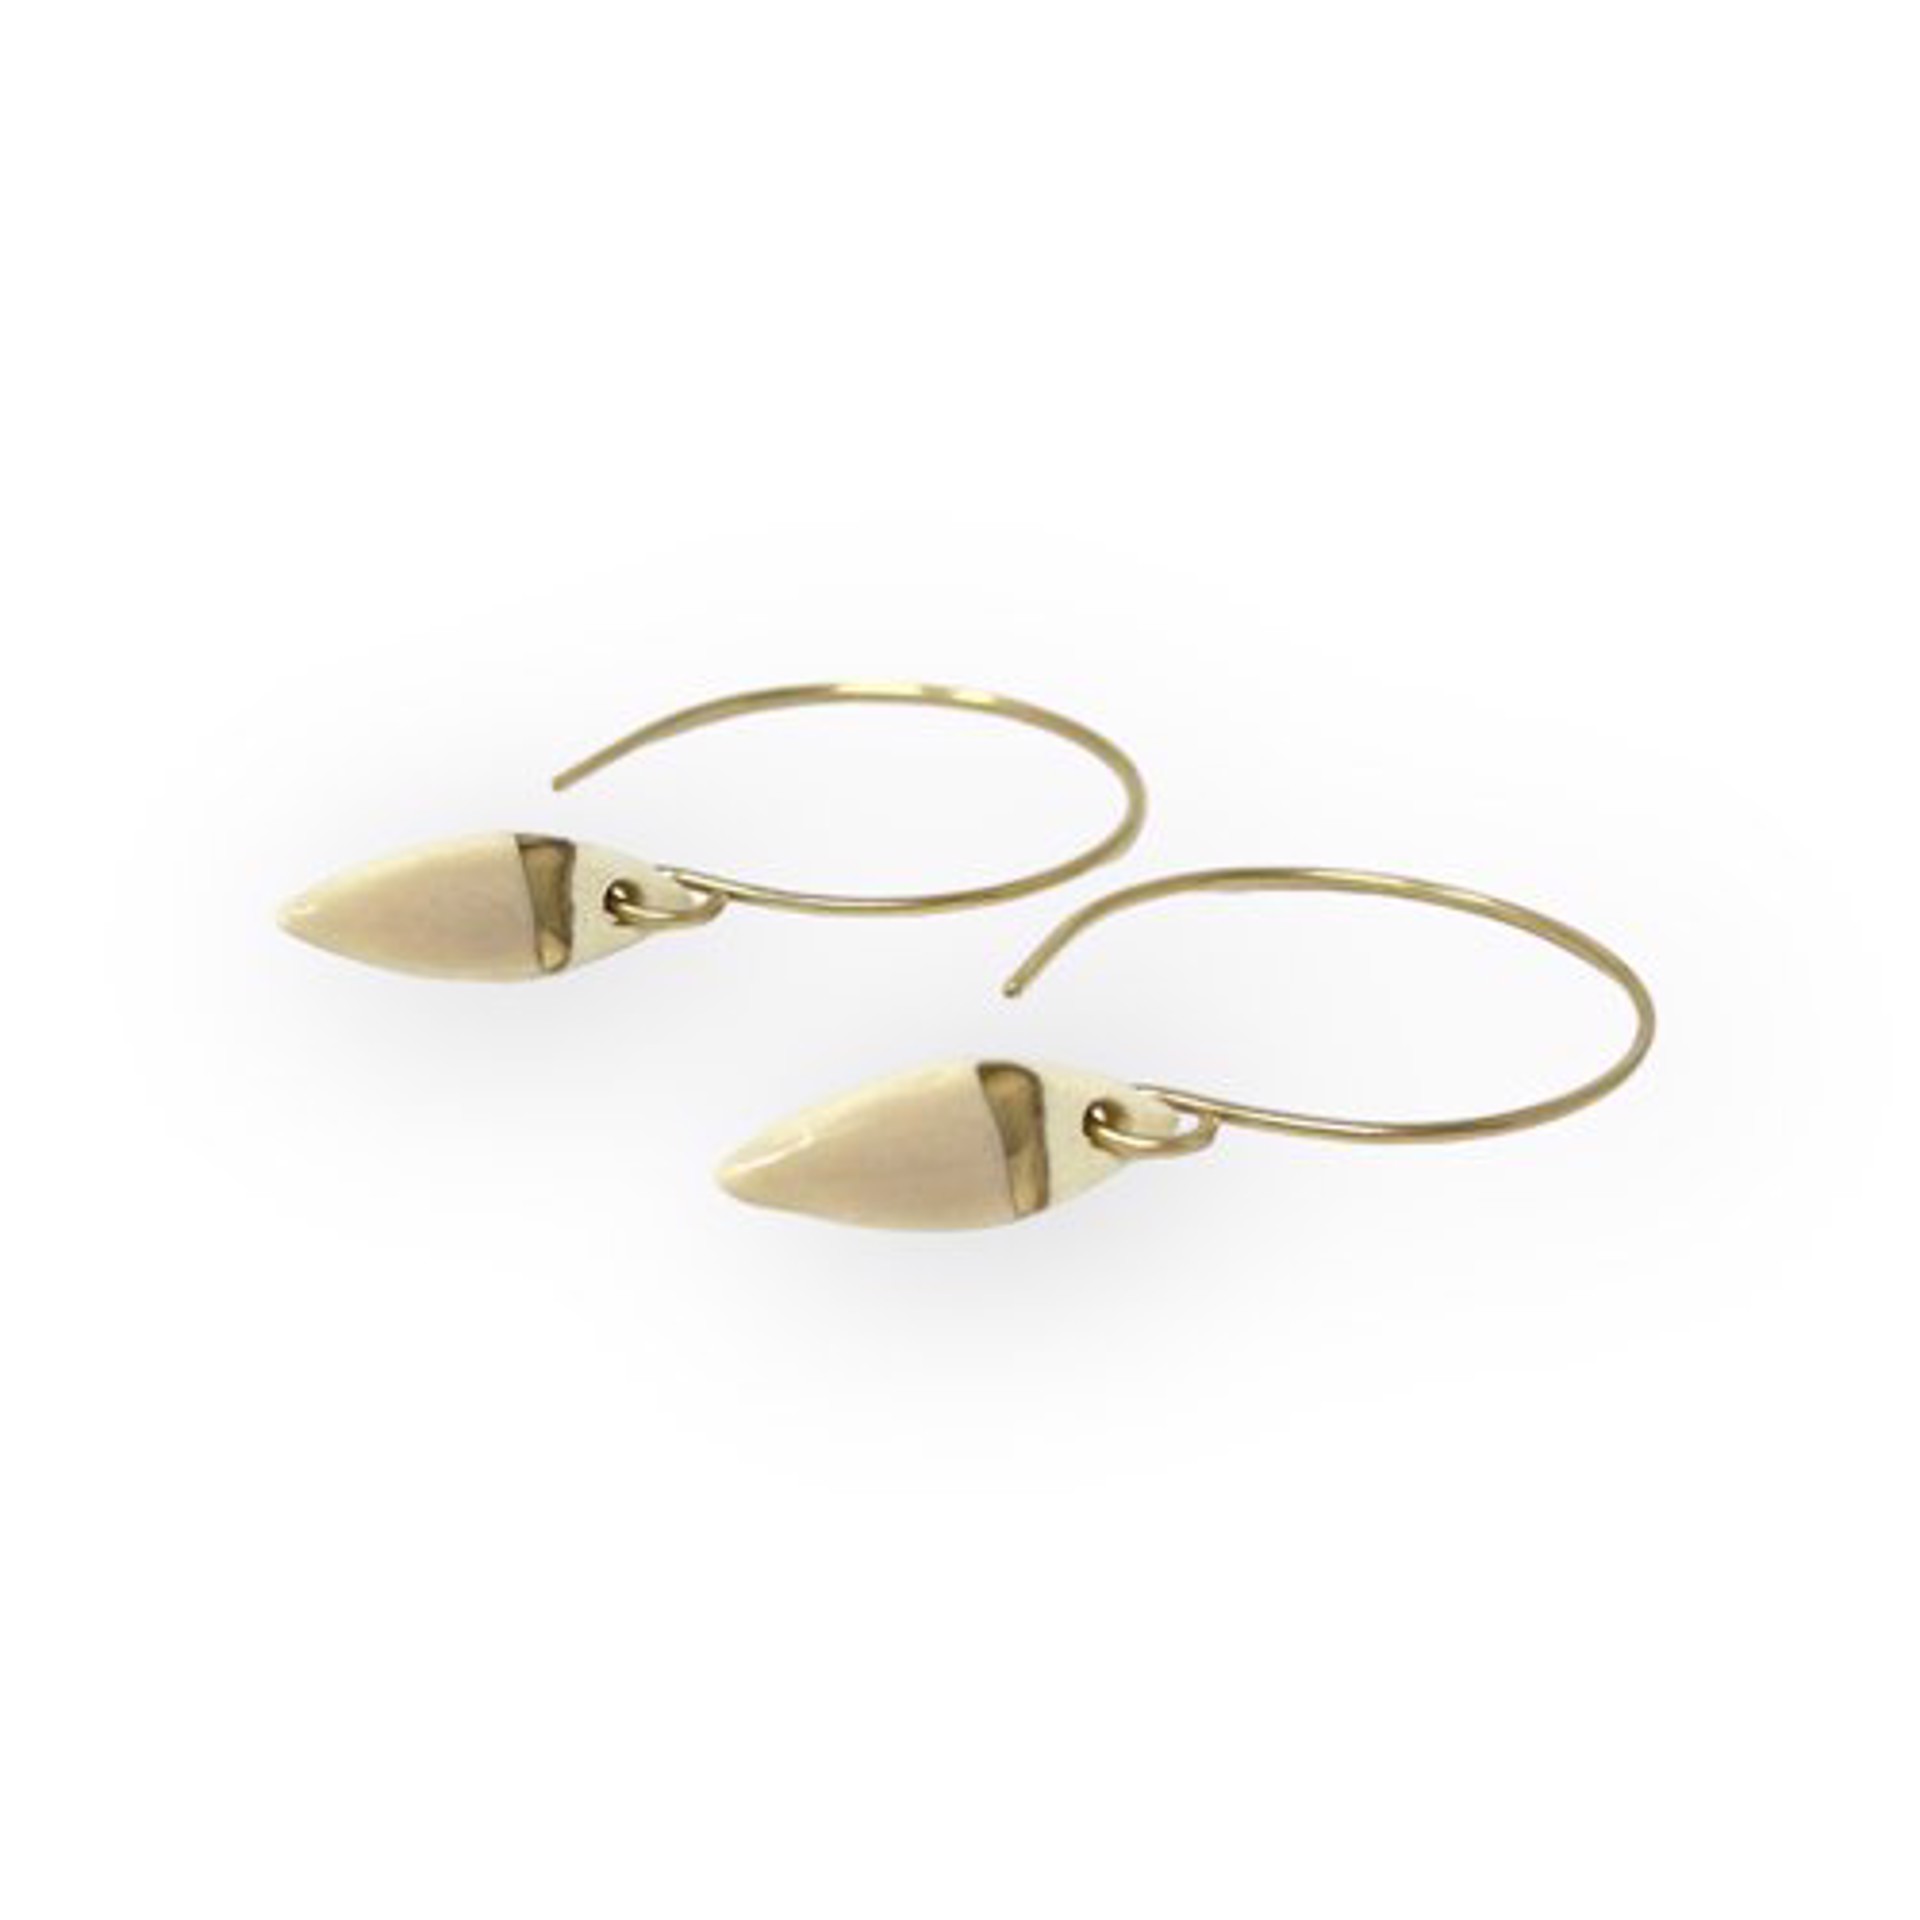 Tiny Hoops w/ Tiny Leaf Earrings - Pale Pink/Gold Line by Zoe Comings